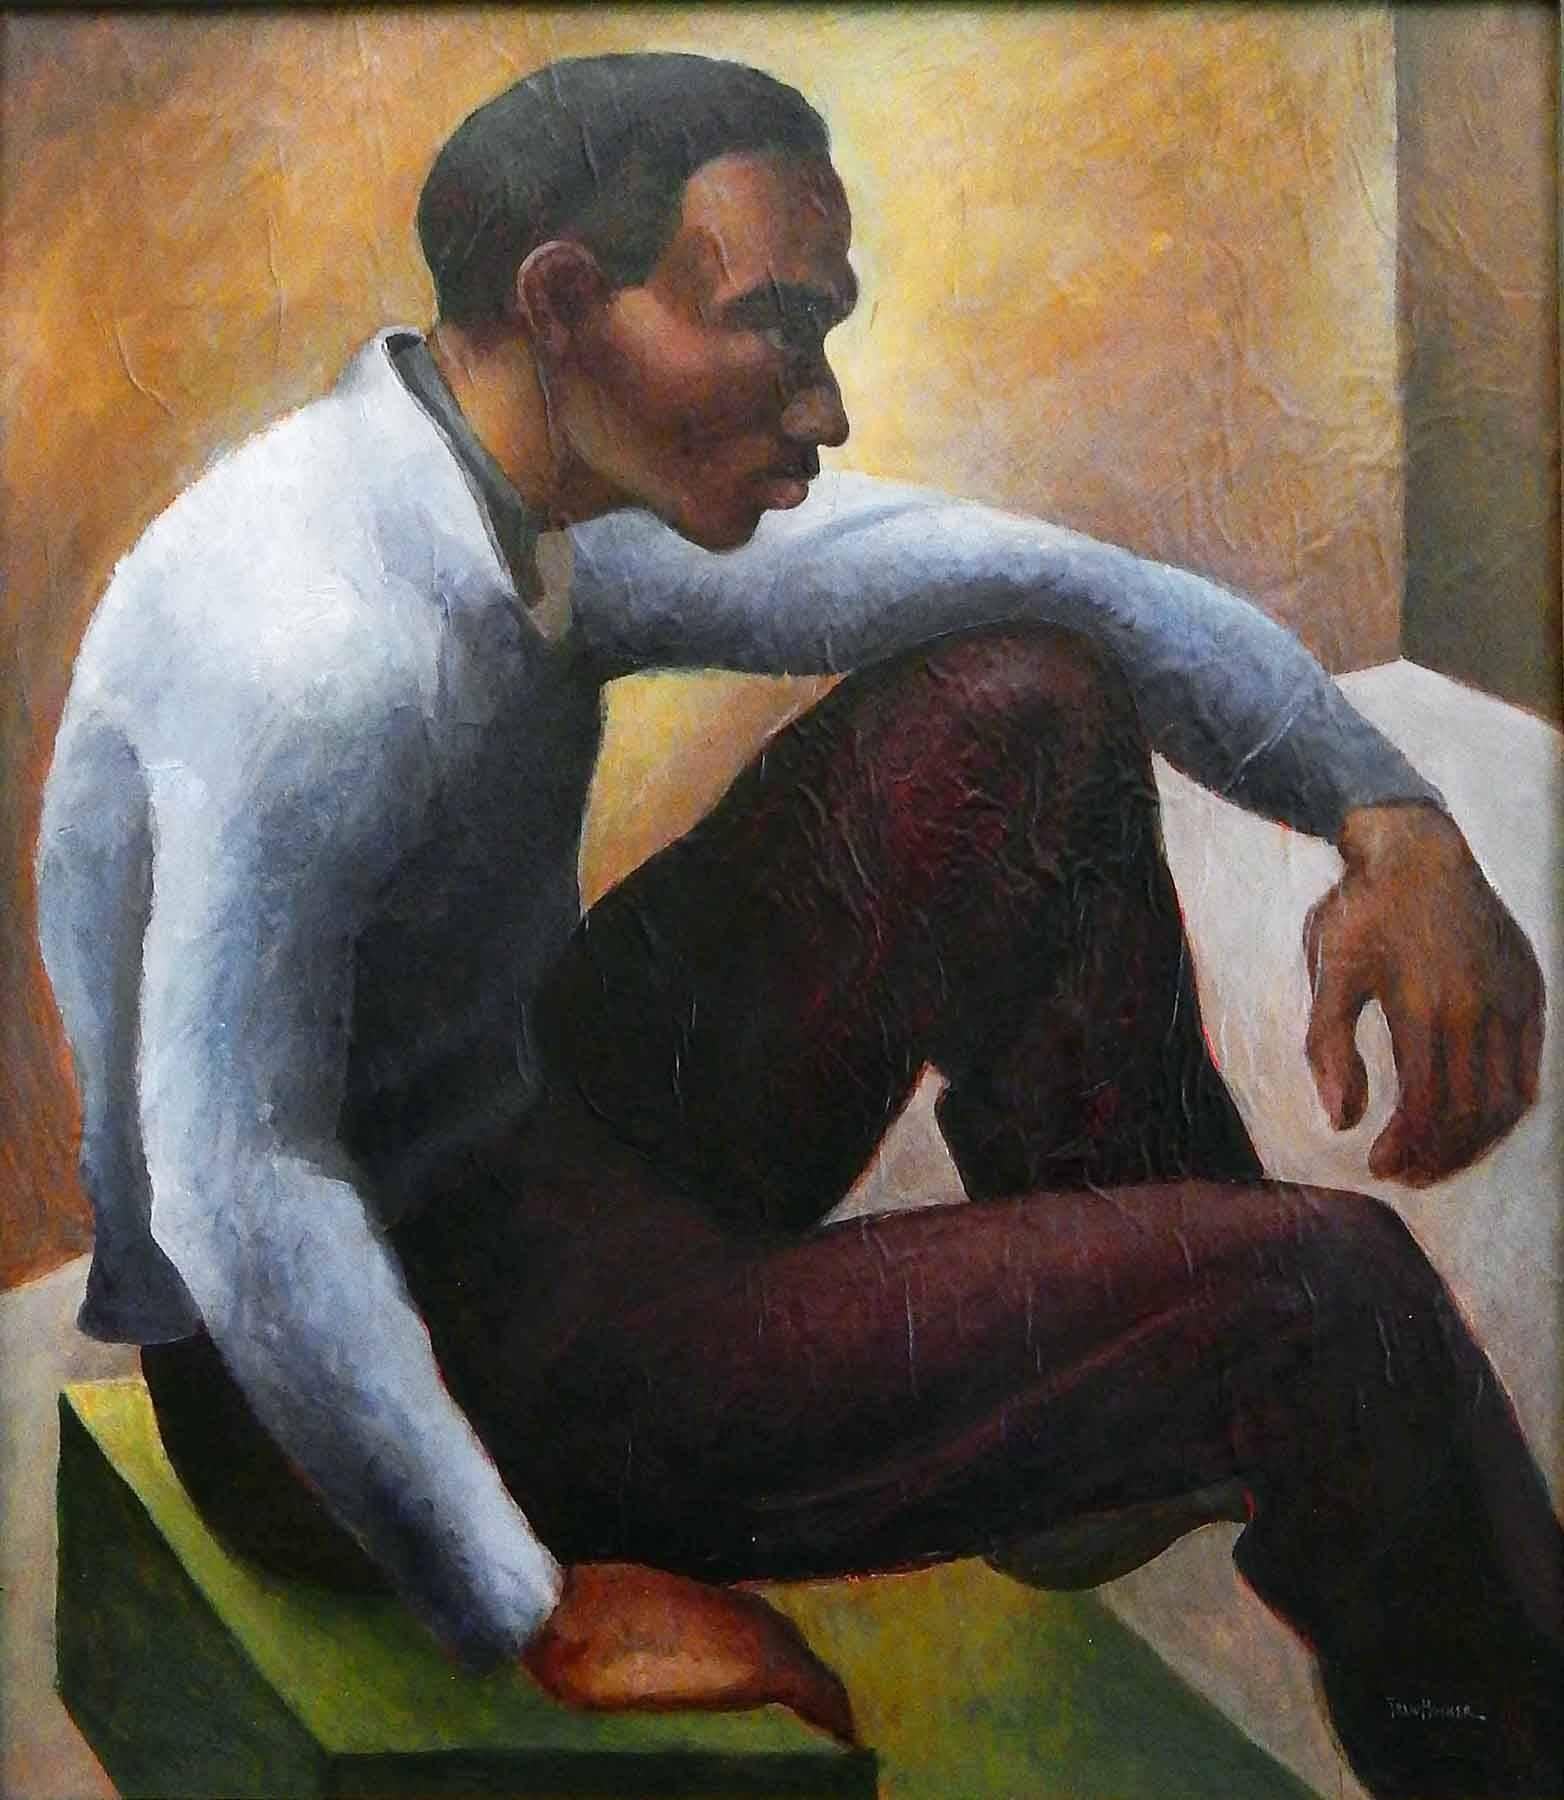 Brilliantly conceived and executed by Trew Hocker, an important muralist who was strongly influenced by Thomas Hart Benton and Grant Wood, this portrait of a young African American man, staring intently into the distance, is a superb example of